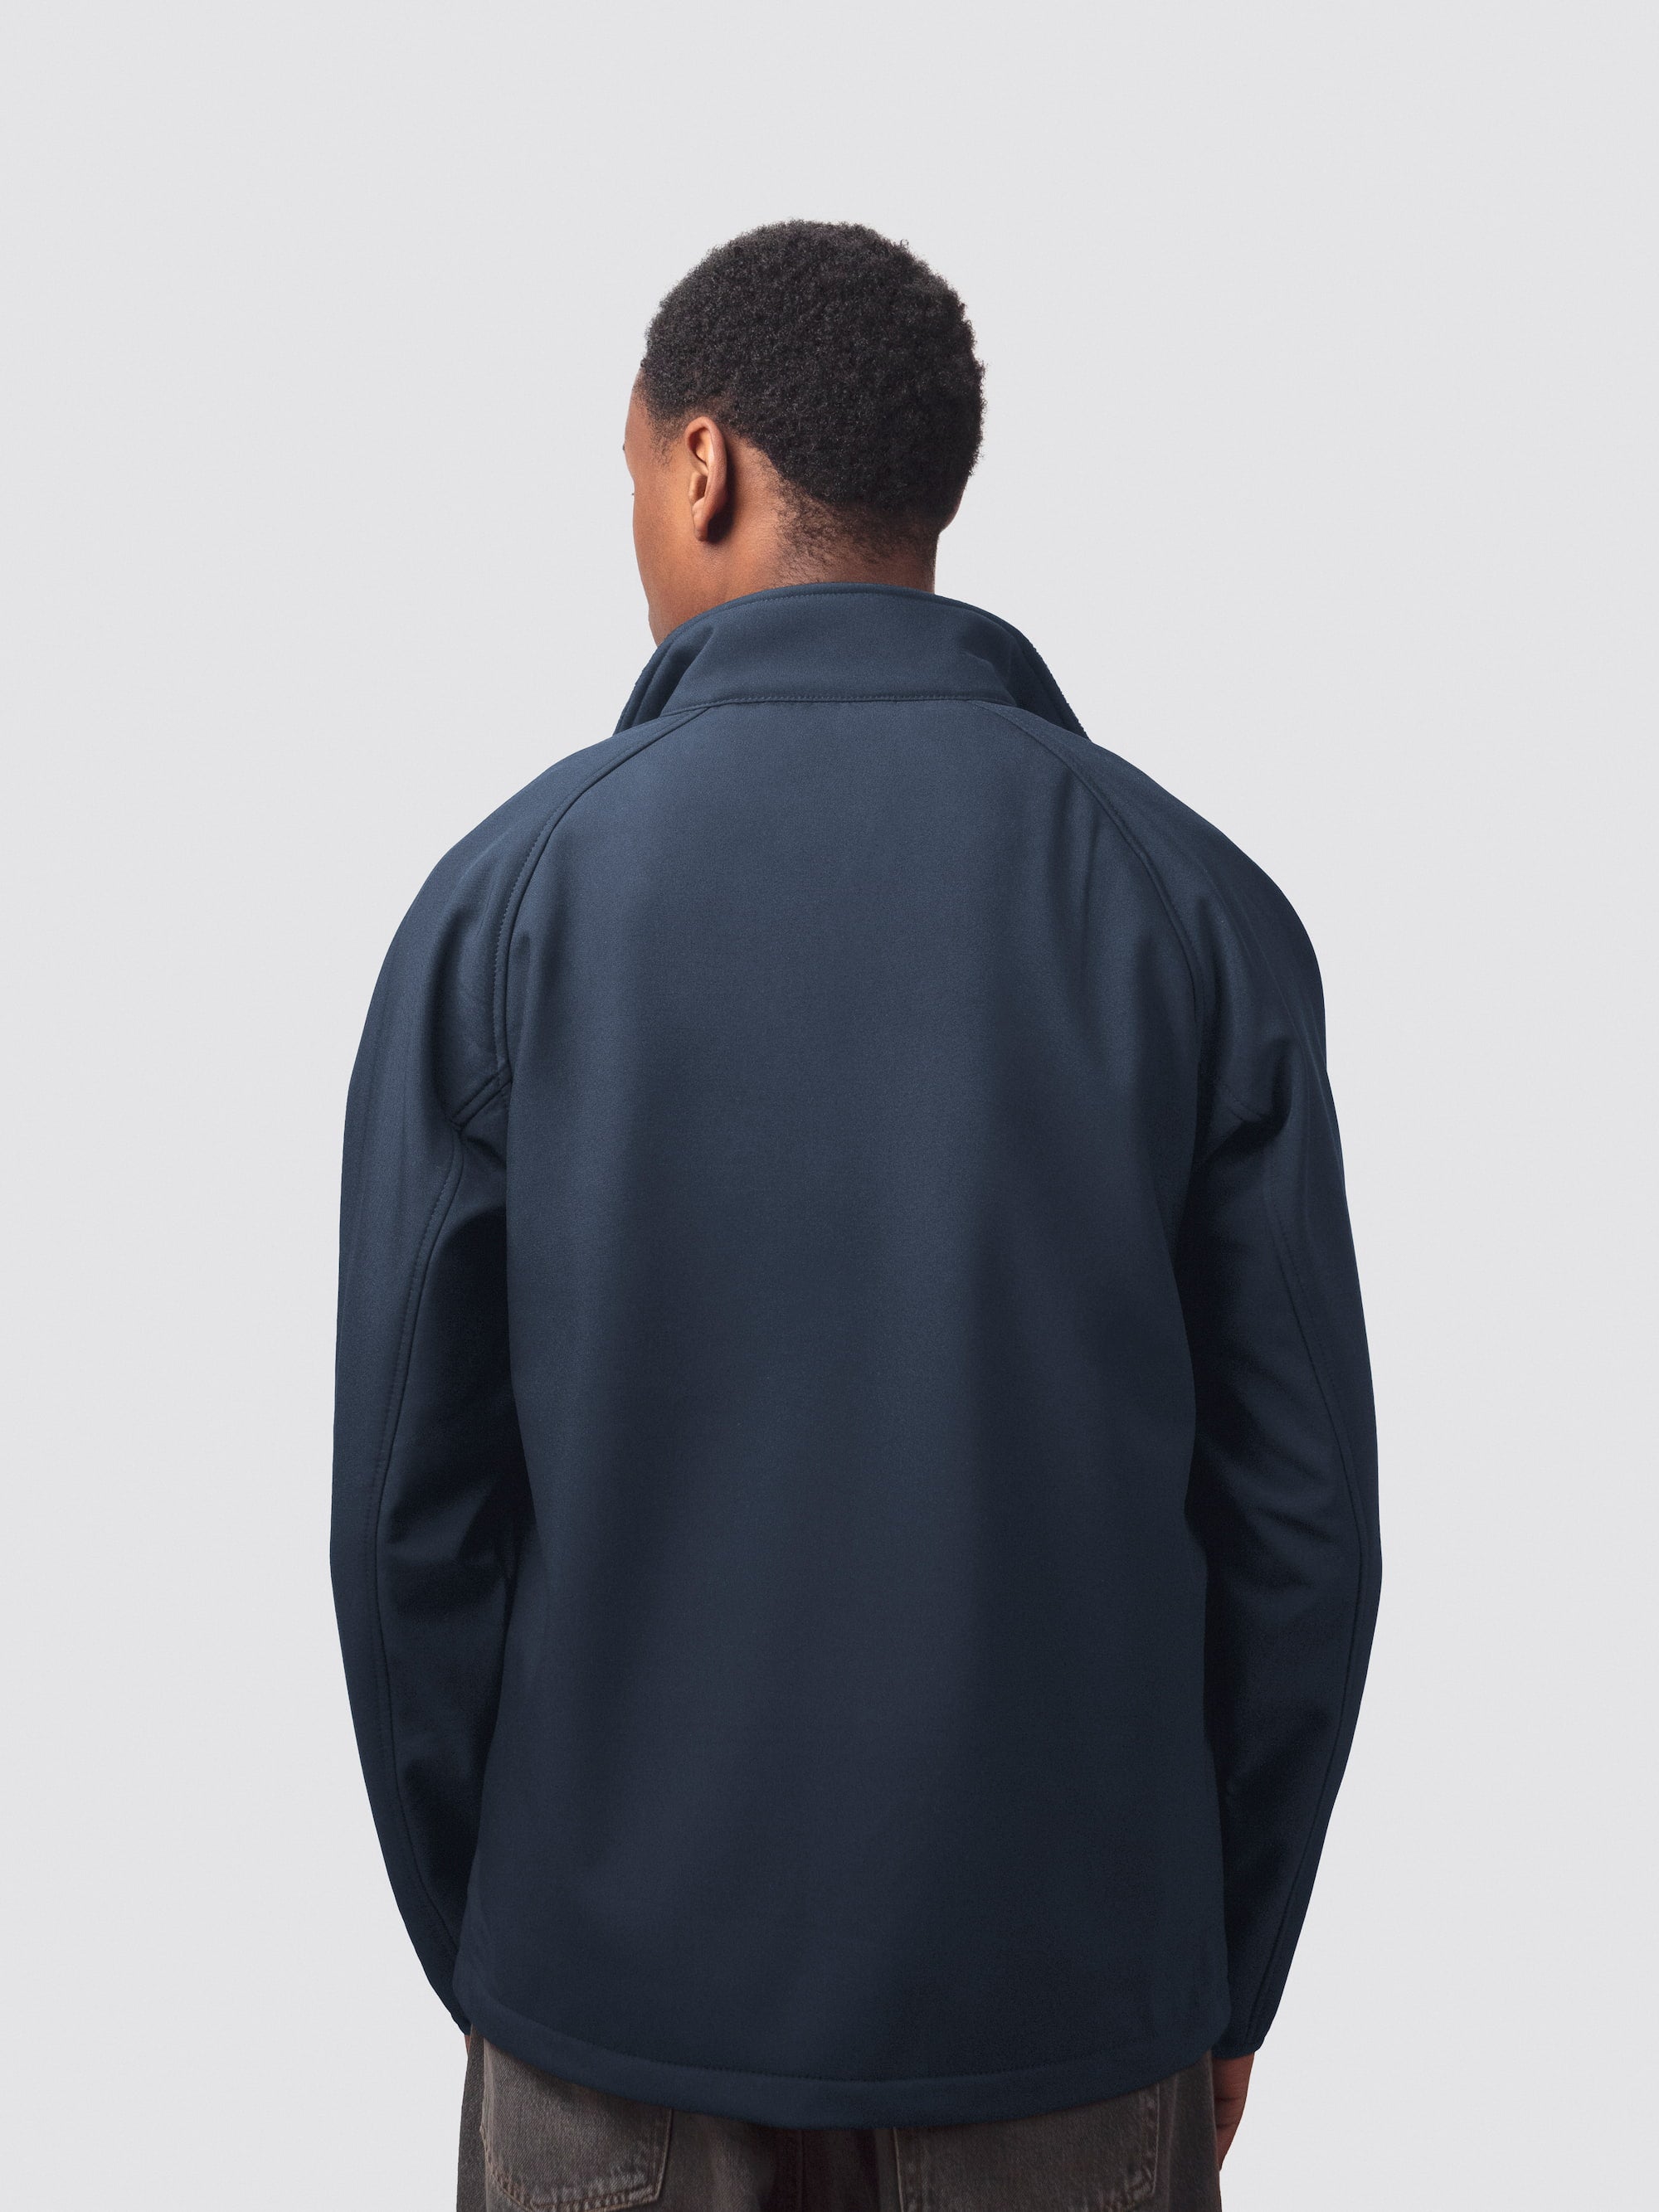 The back of a soft shell jacket, worn by a university student